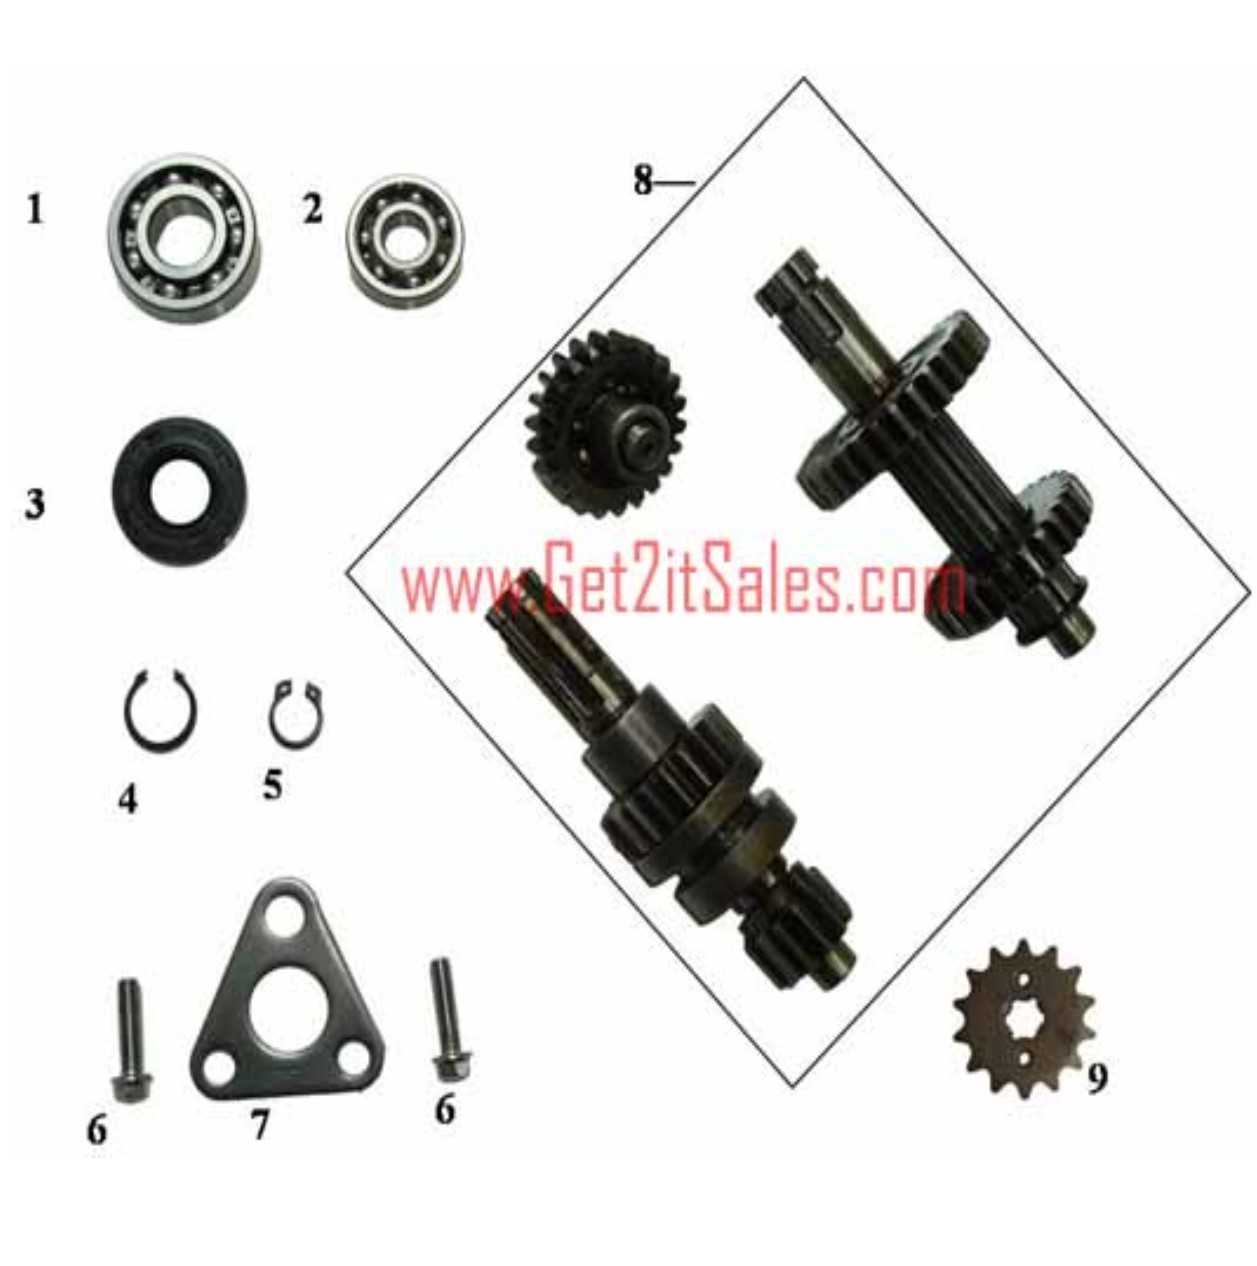 Transmission Gears (Automatic with Reverse) 110cc ATV-Dirtbikes